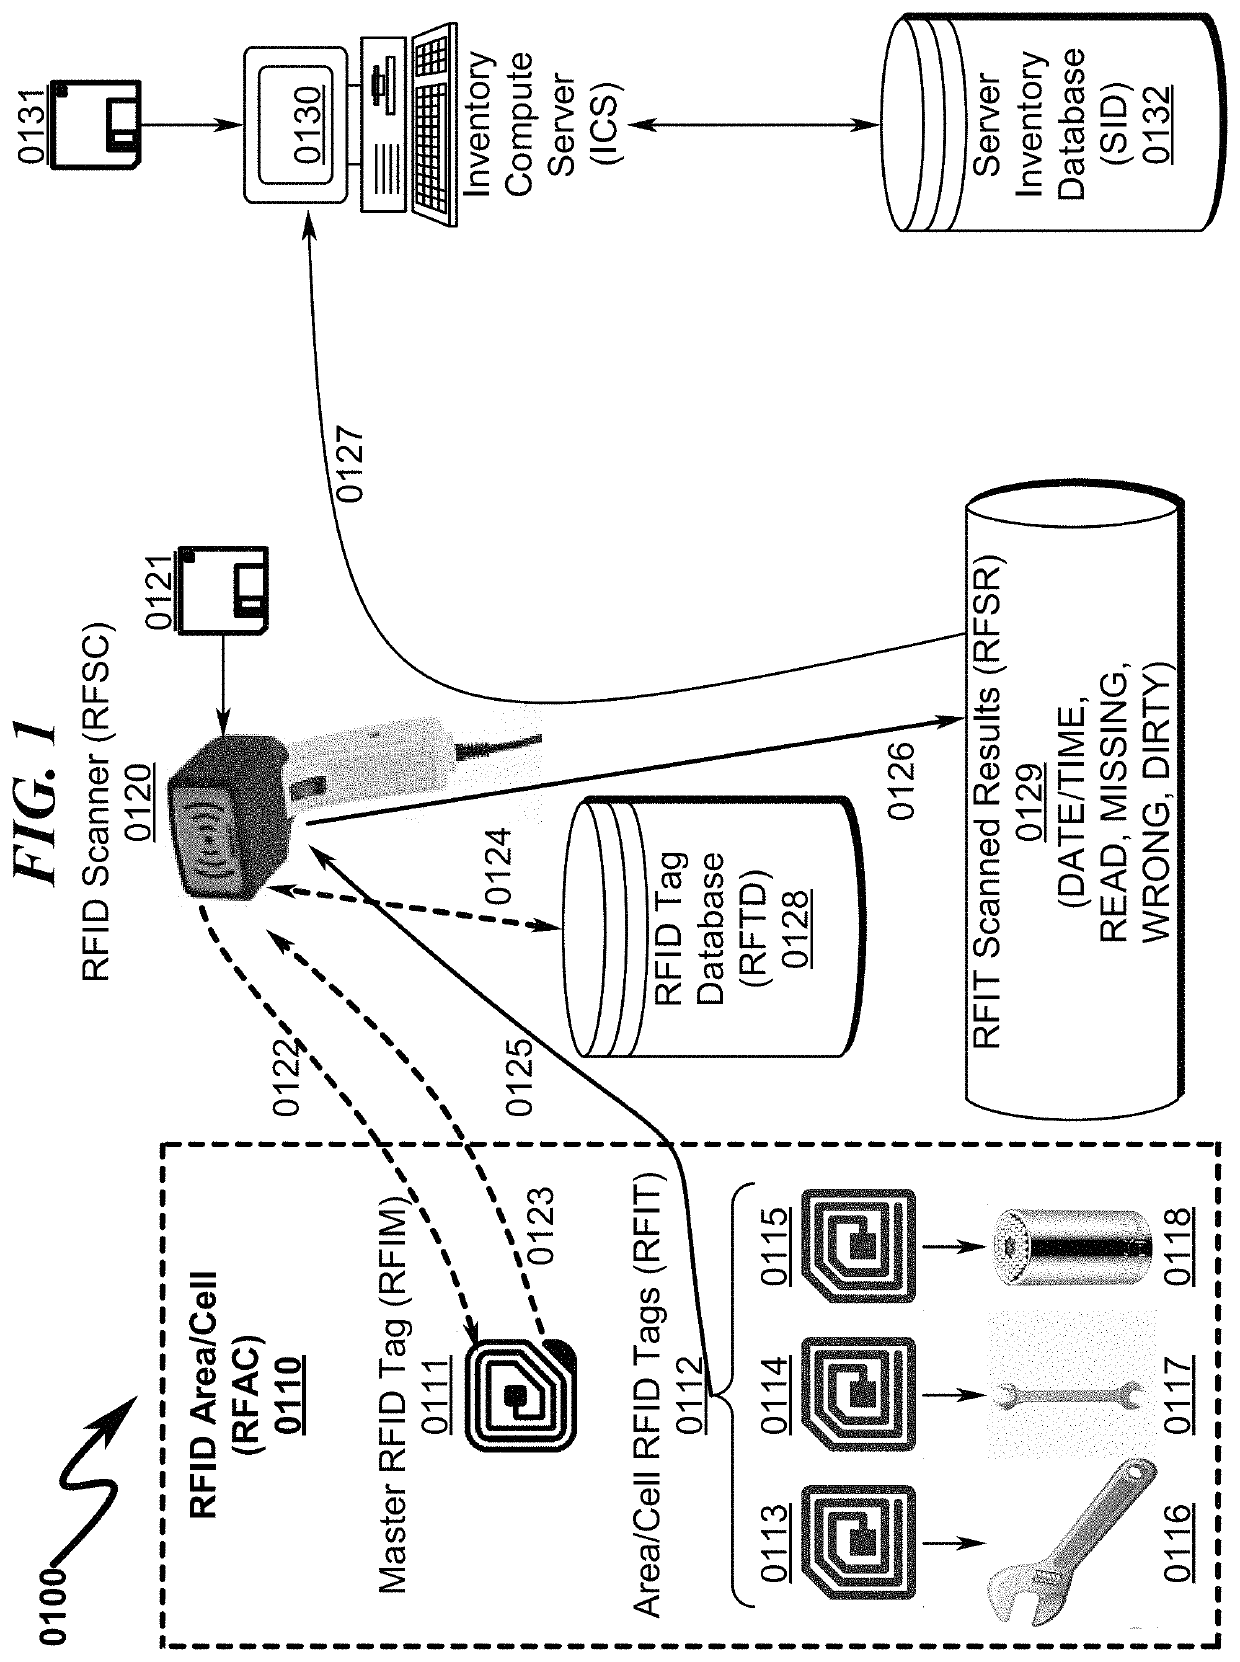 RFID inventory system and method